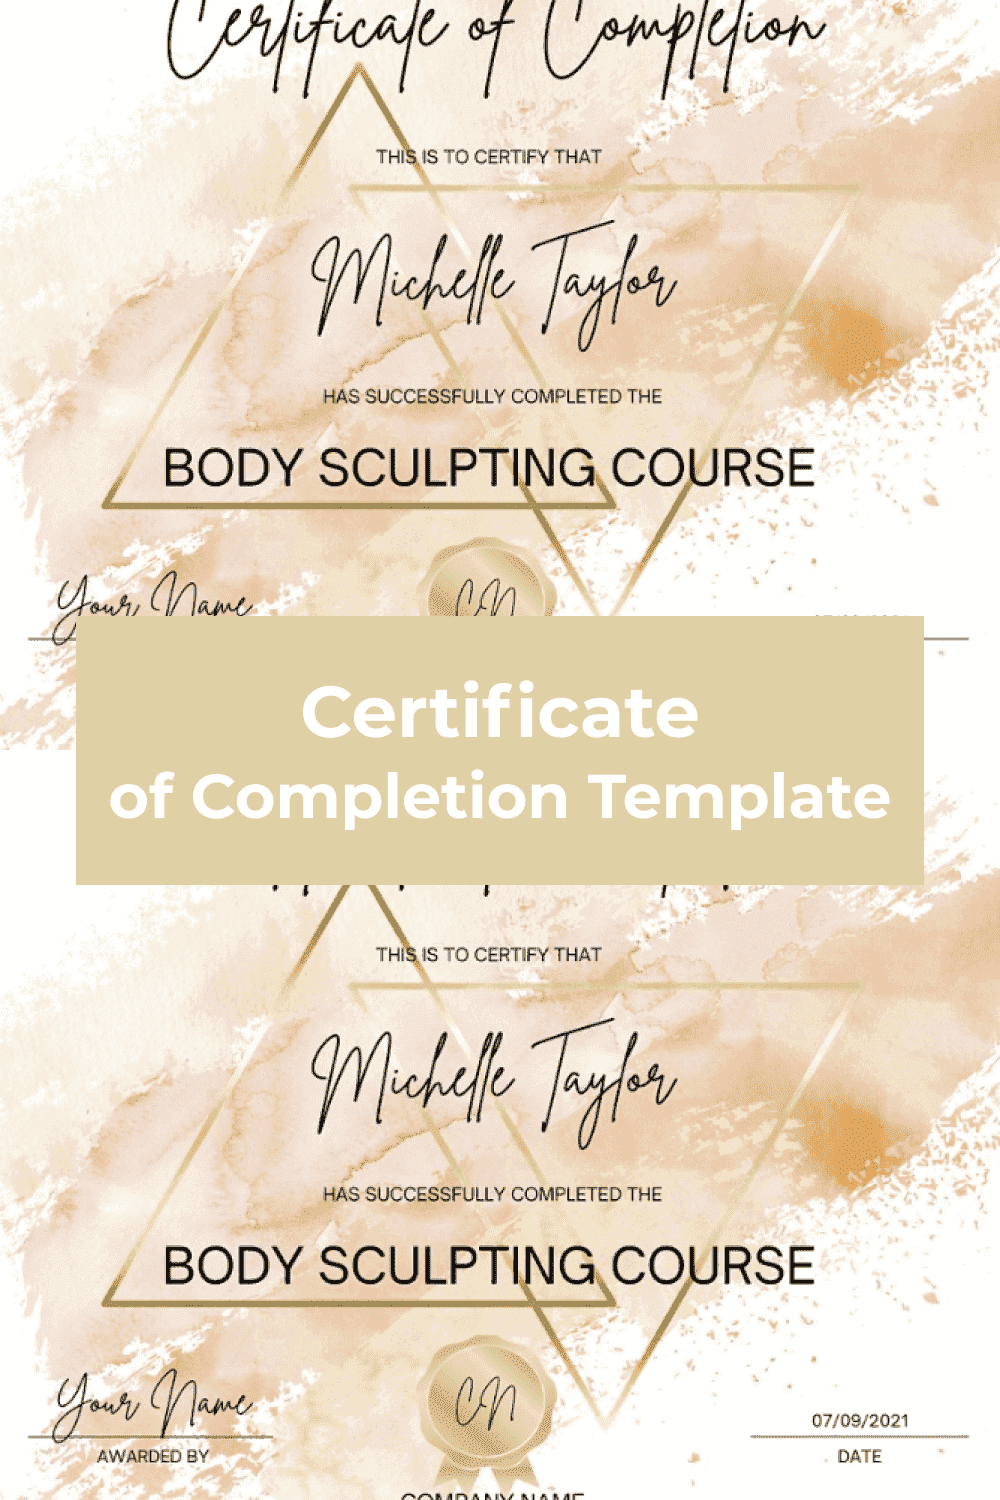 Certificate Of Completion Template: Awarded By, Date And Name..